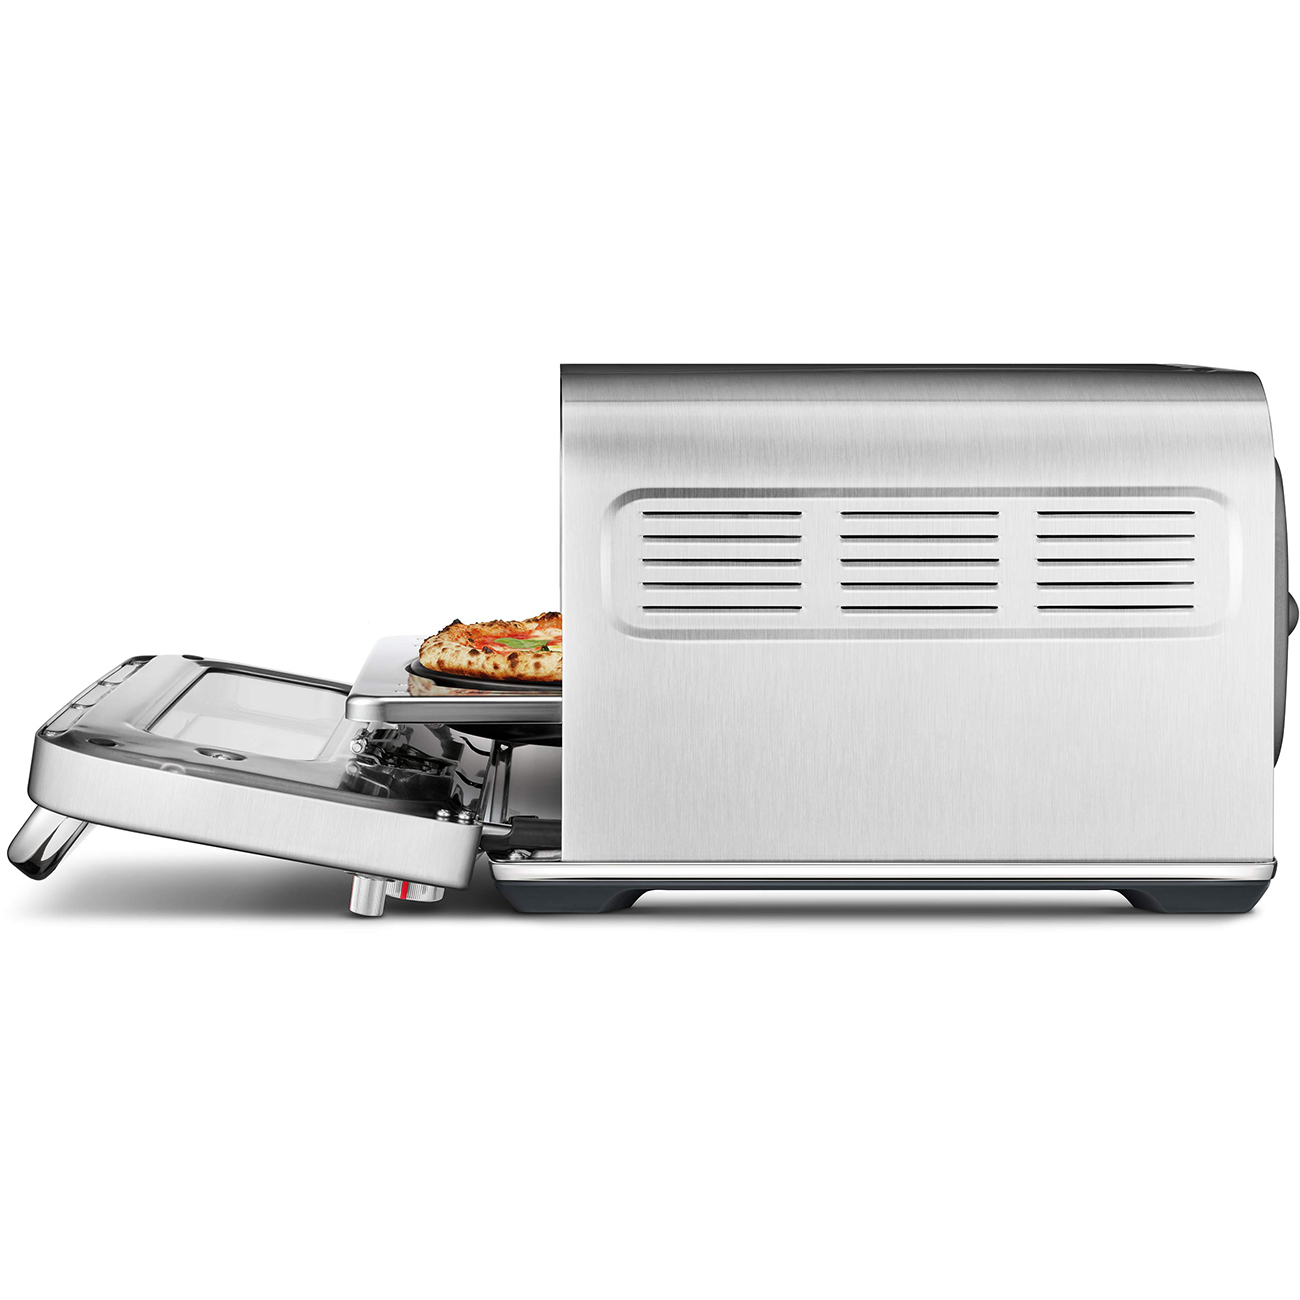  Side view of the Smart Oven with pizza